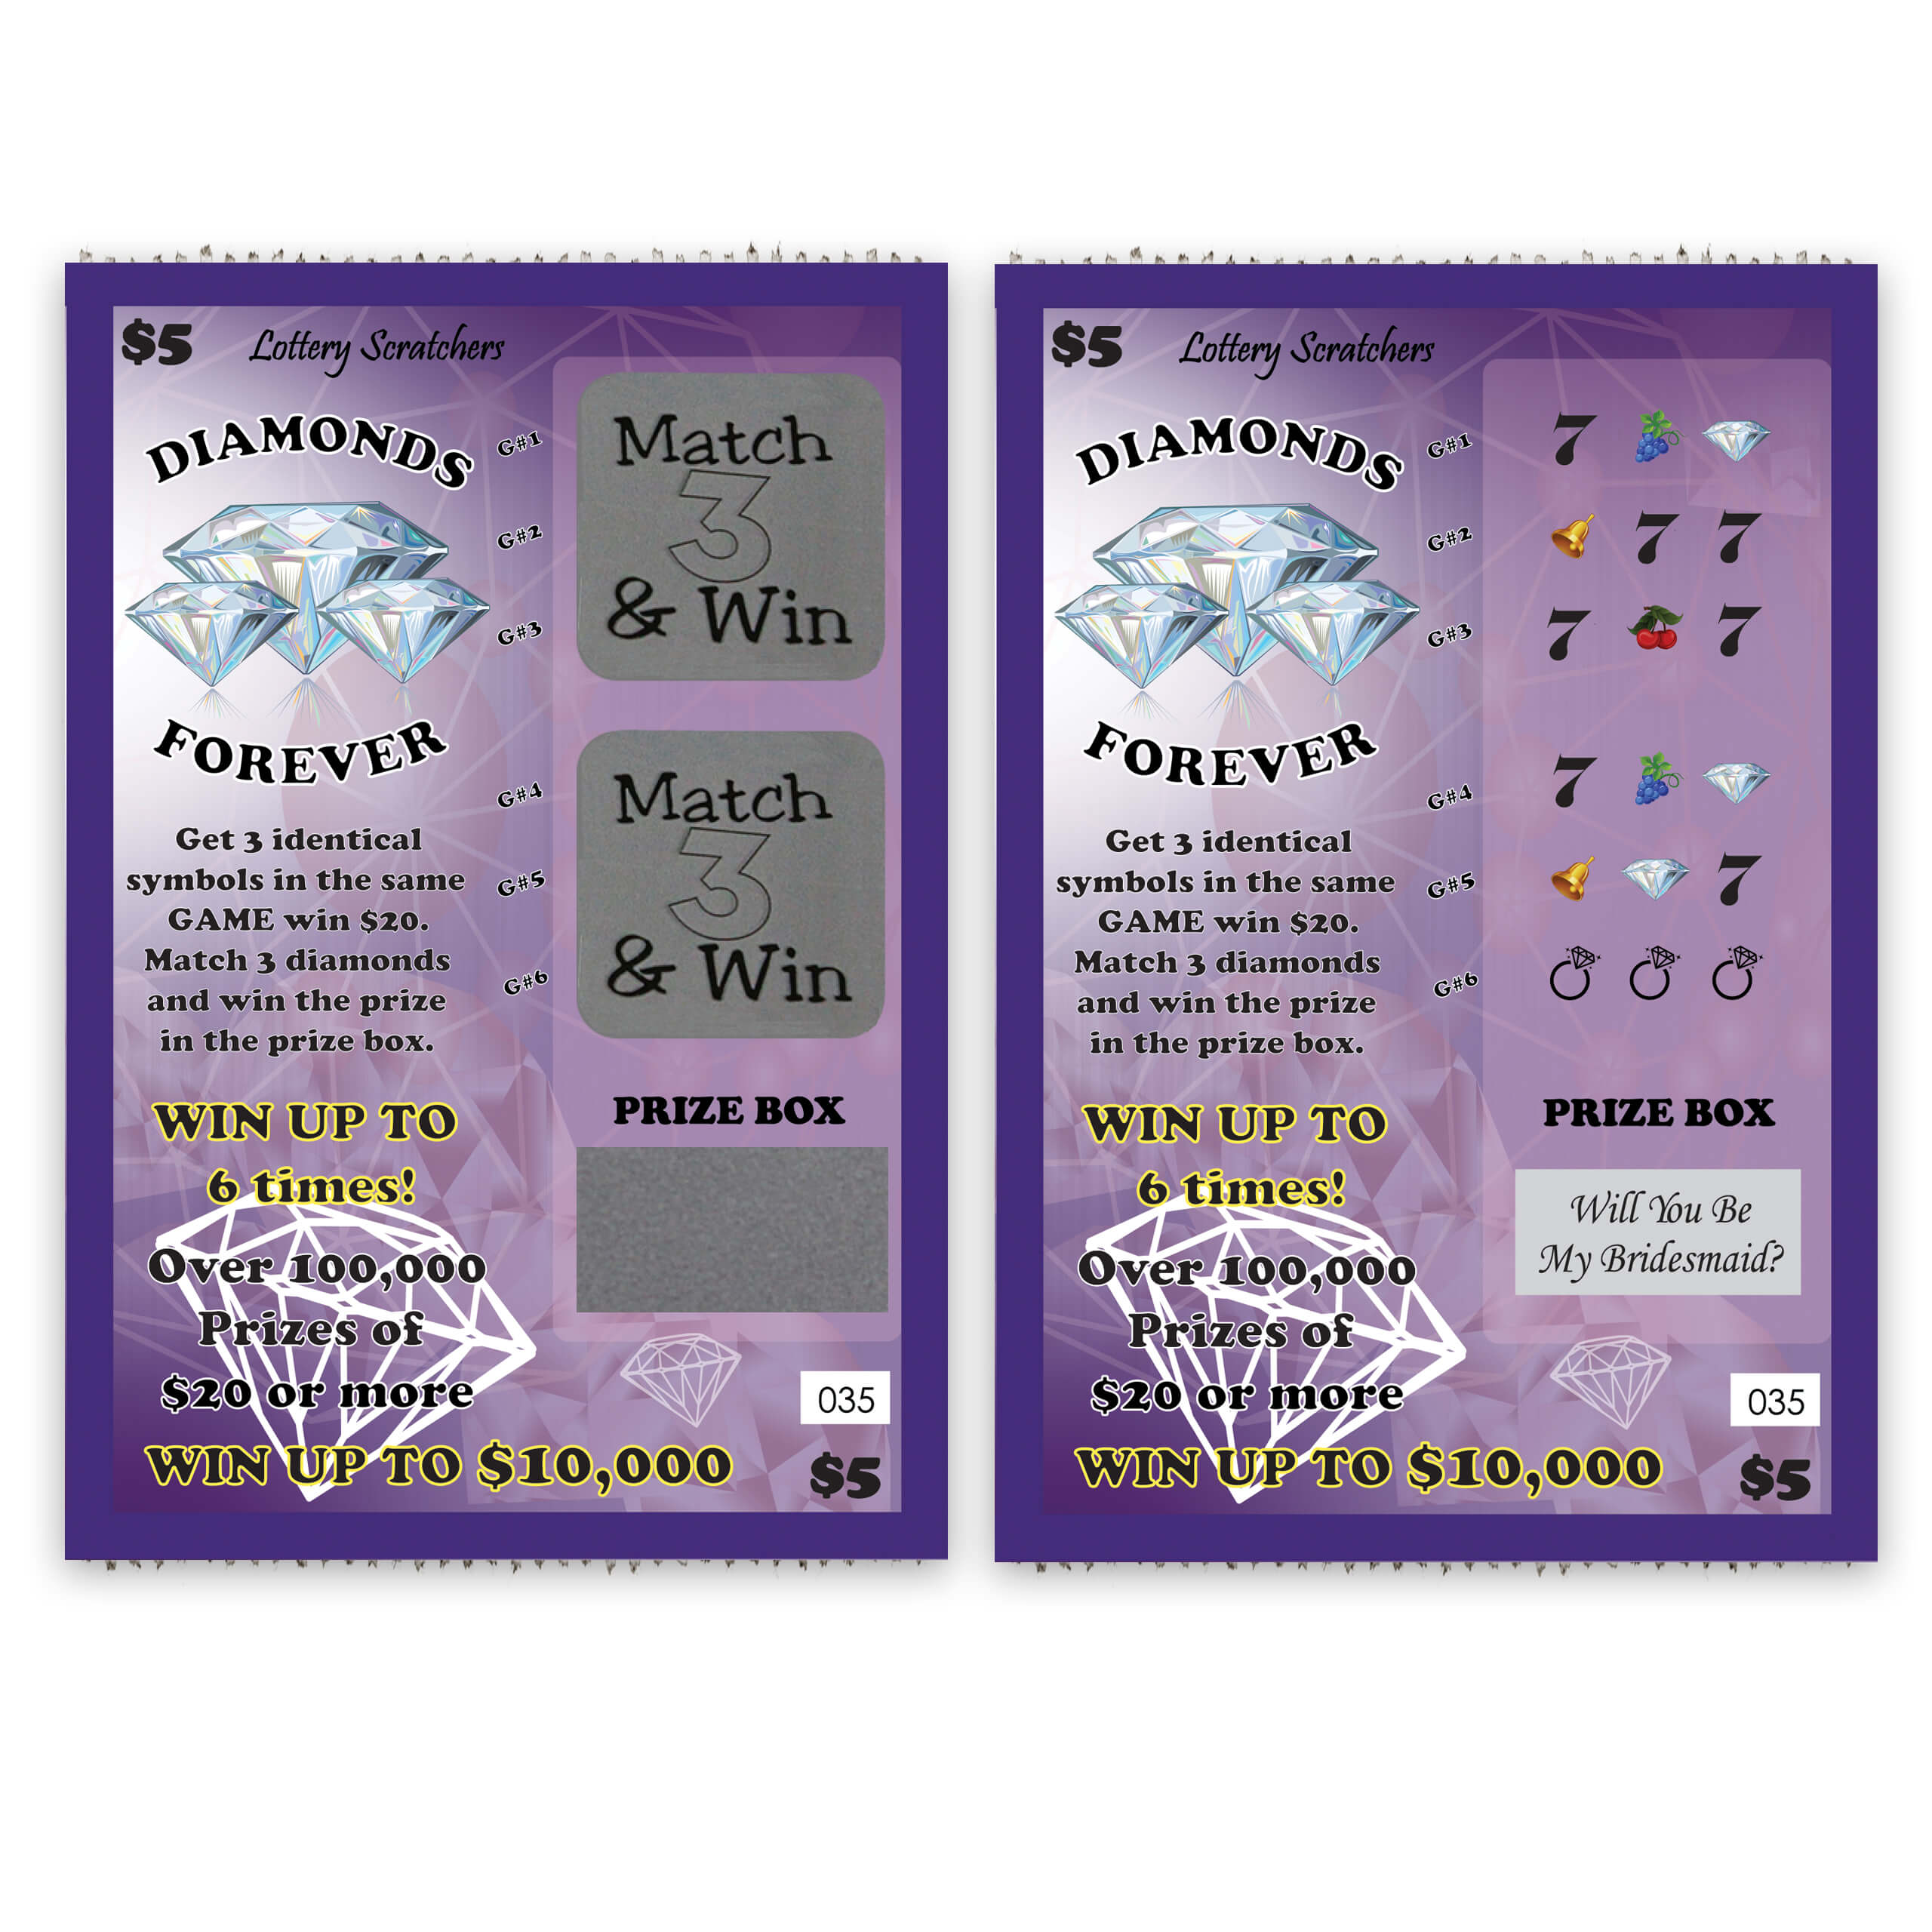 Will You Be My Bridesmaid? Lotto Replica Scratch Off Card 4" x 6"